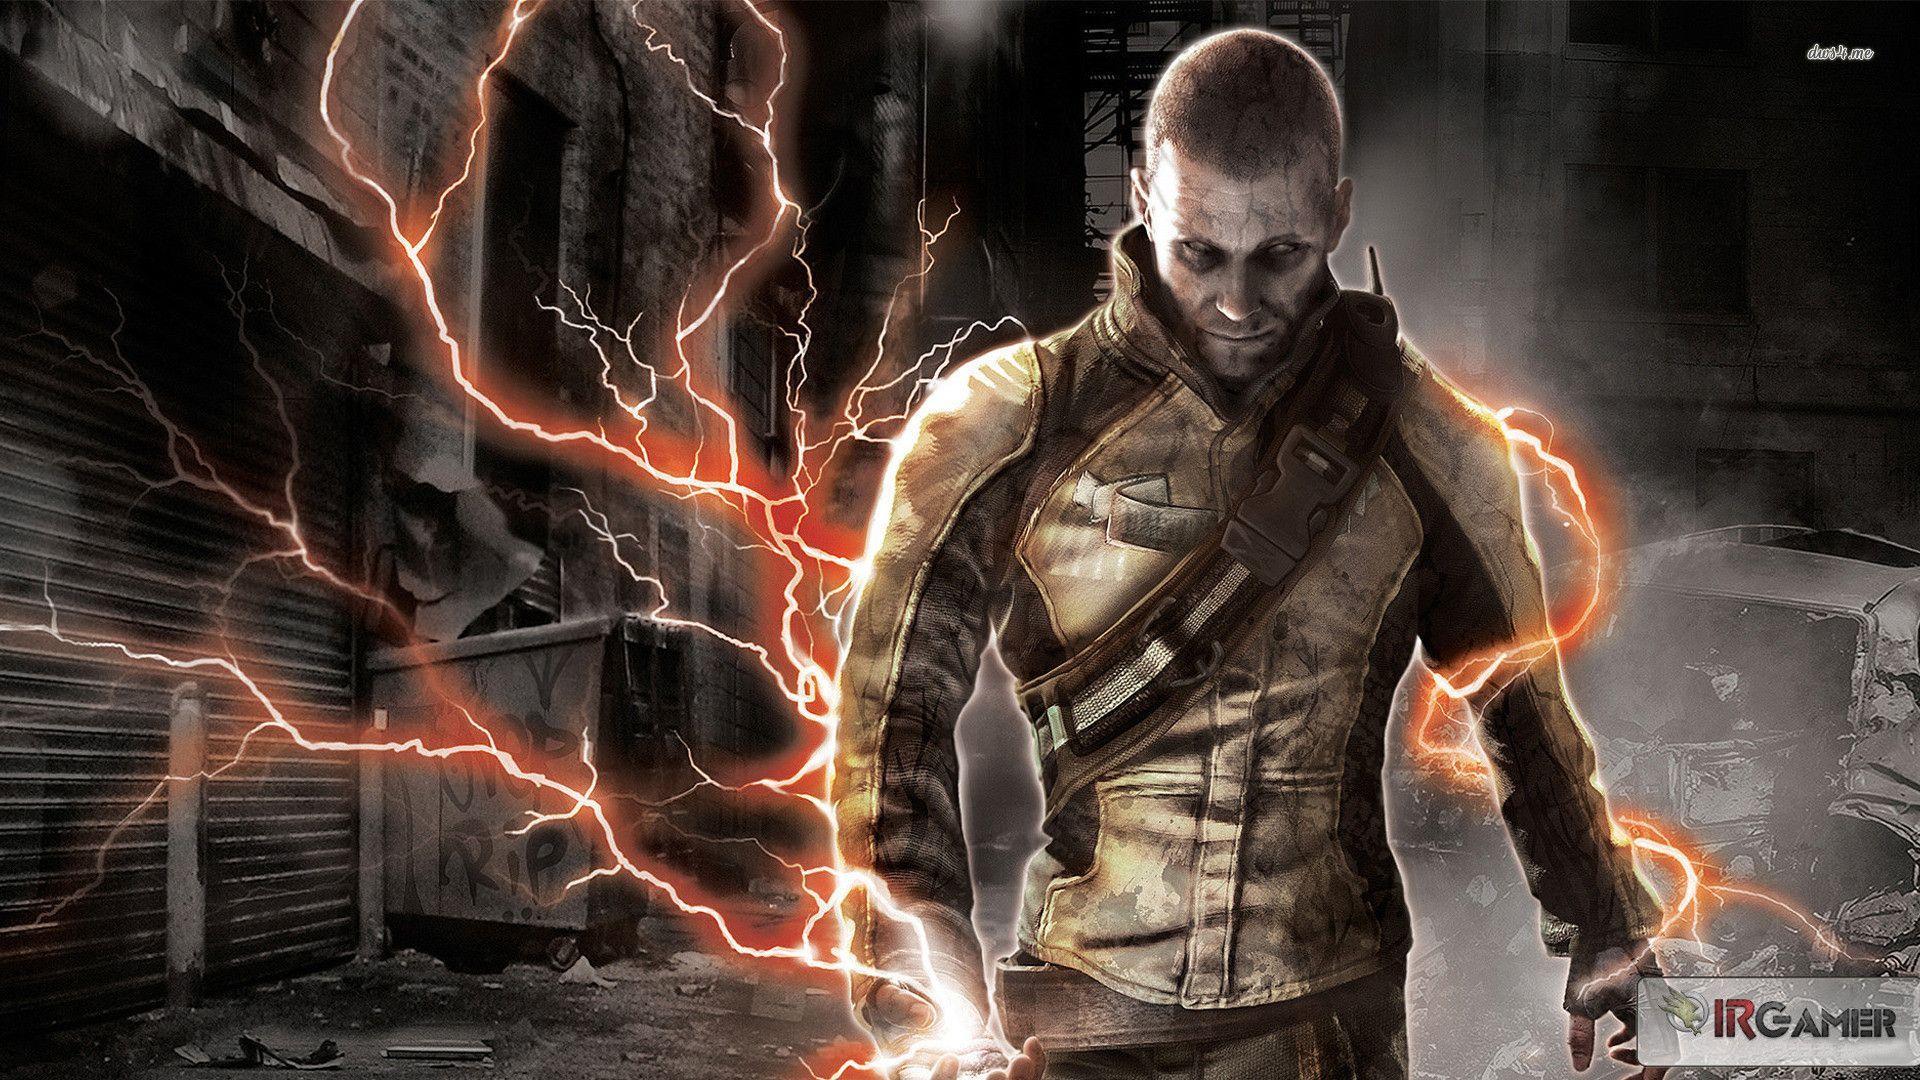 download infamous ™ 2 for free